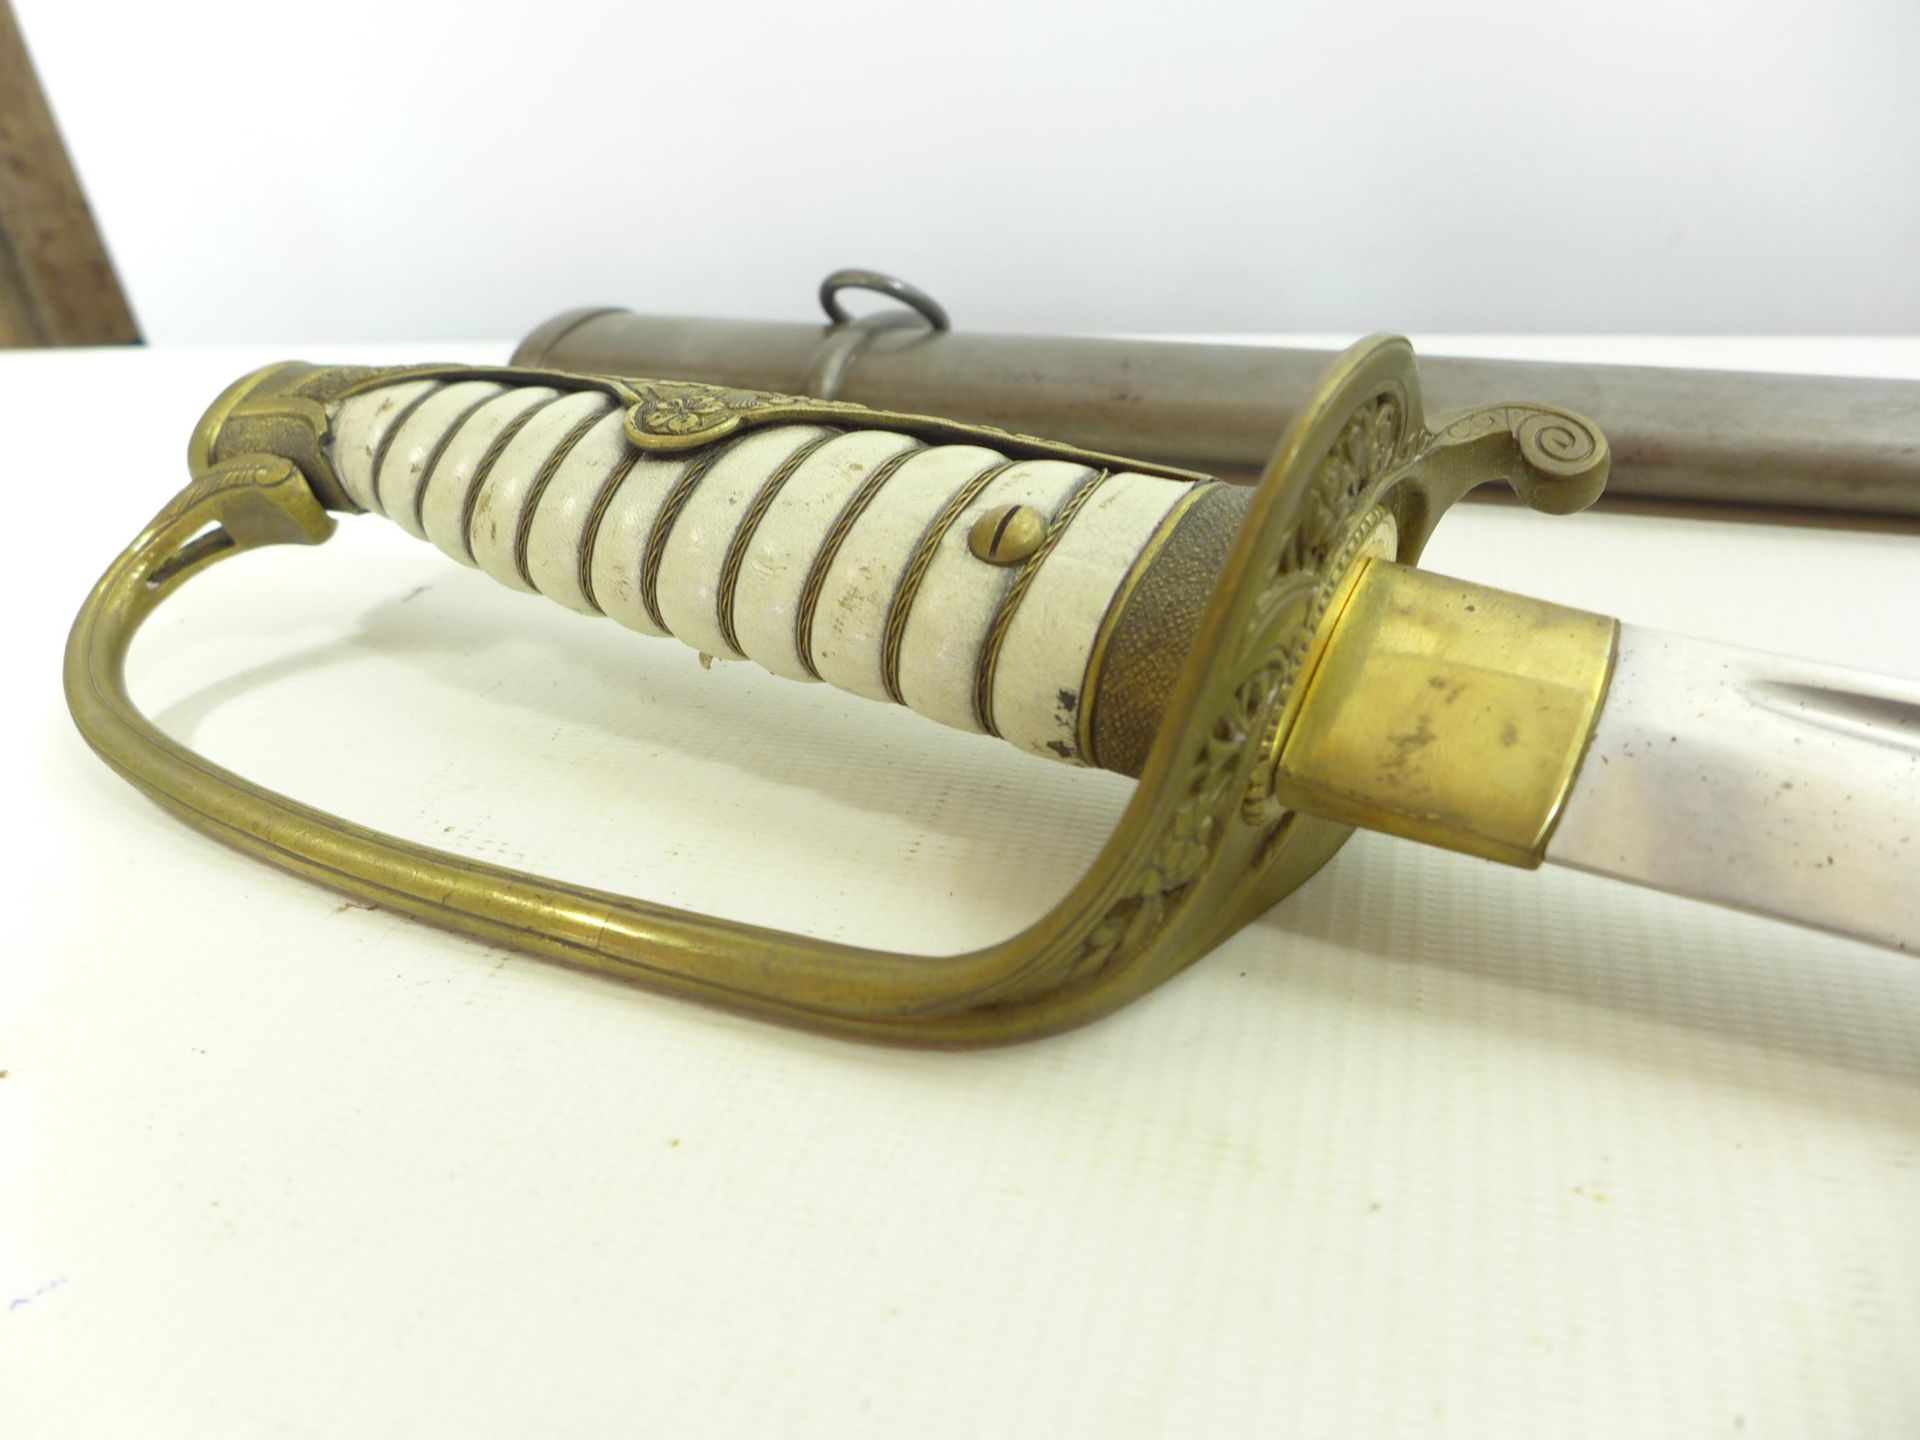 A JAPANESE CAVALRY OFFICERS SWORD AND SCABBARD, 64CM BLADE, PIERCED BRASS GUARD - Image 4 of 10